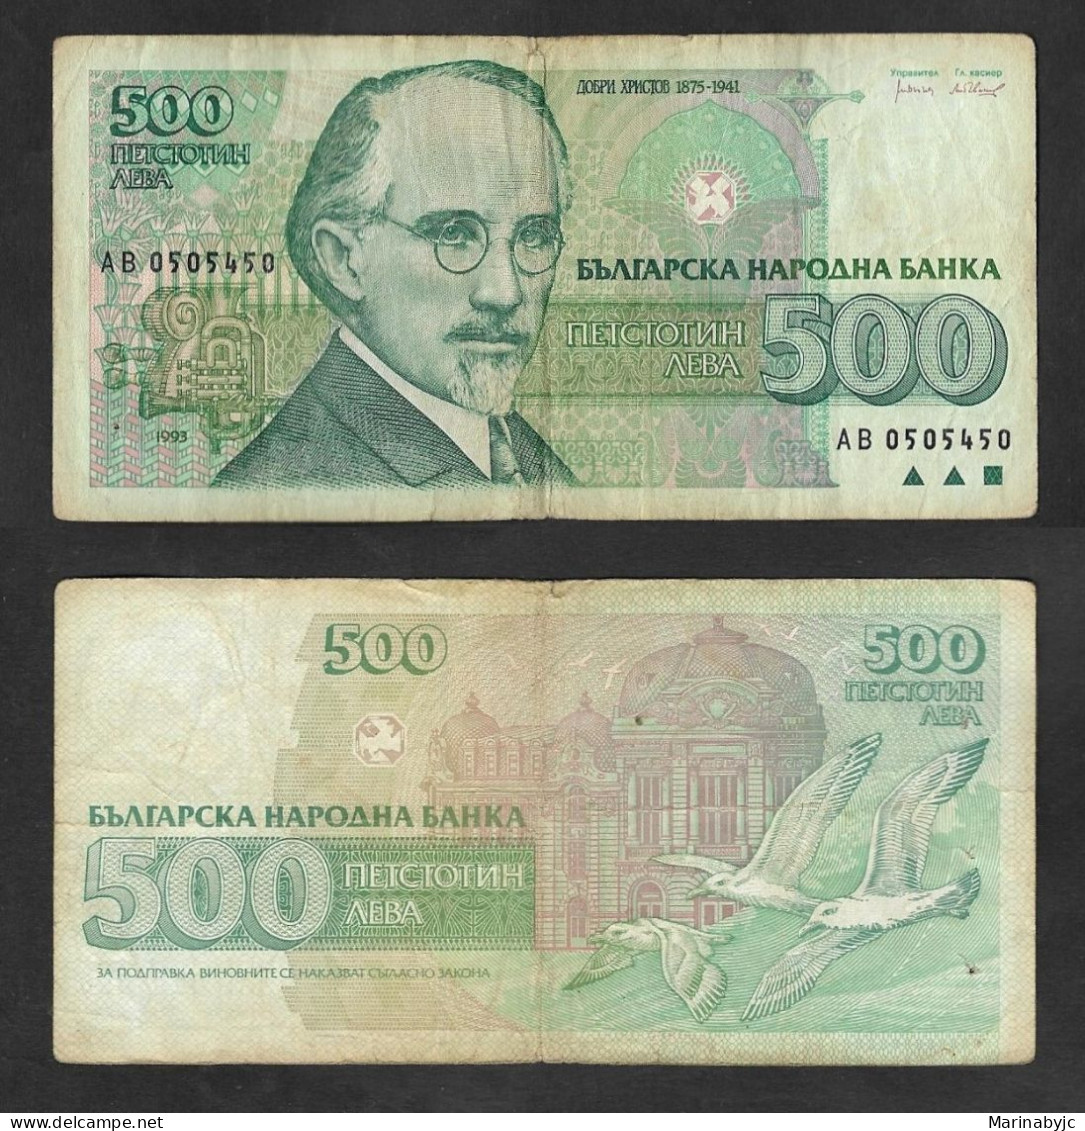 SE)1993 BULGARIA, 500 LEVA BANKNOTE OF THE CENTRAL BANK OF BULGARIA, WITH REVERSE, VF - Usati